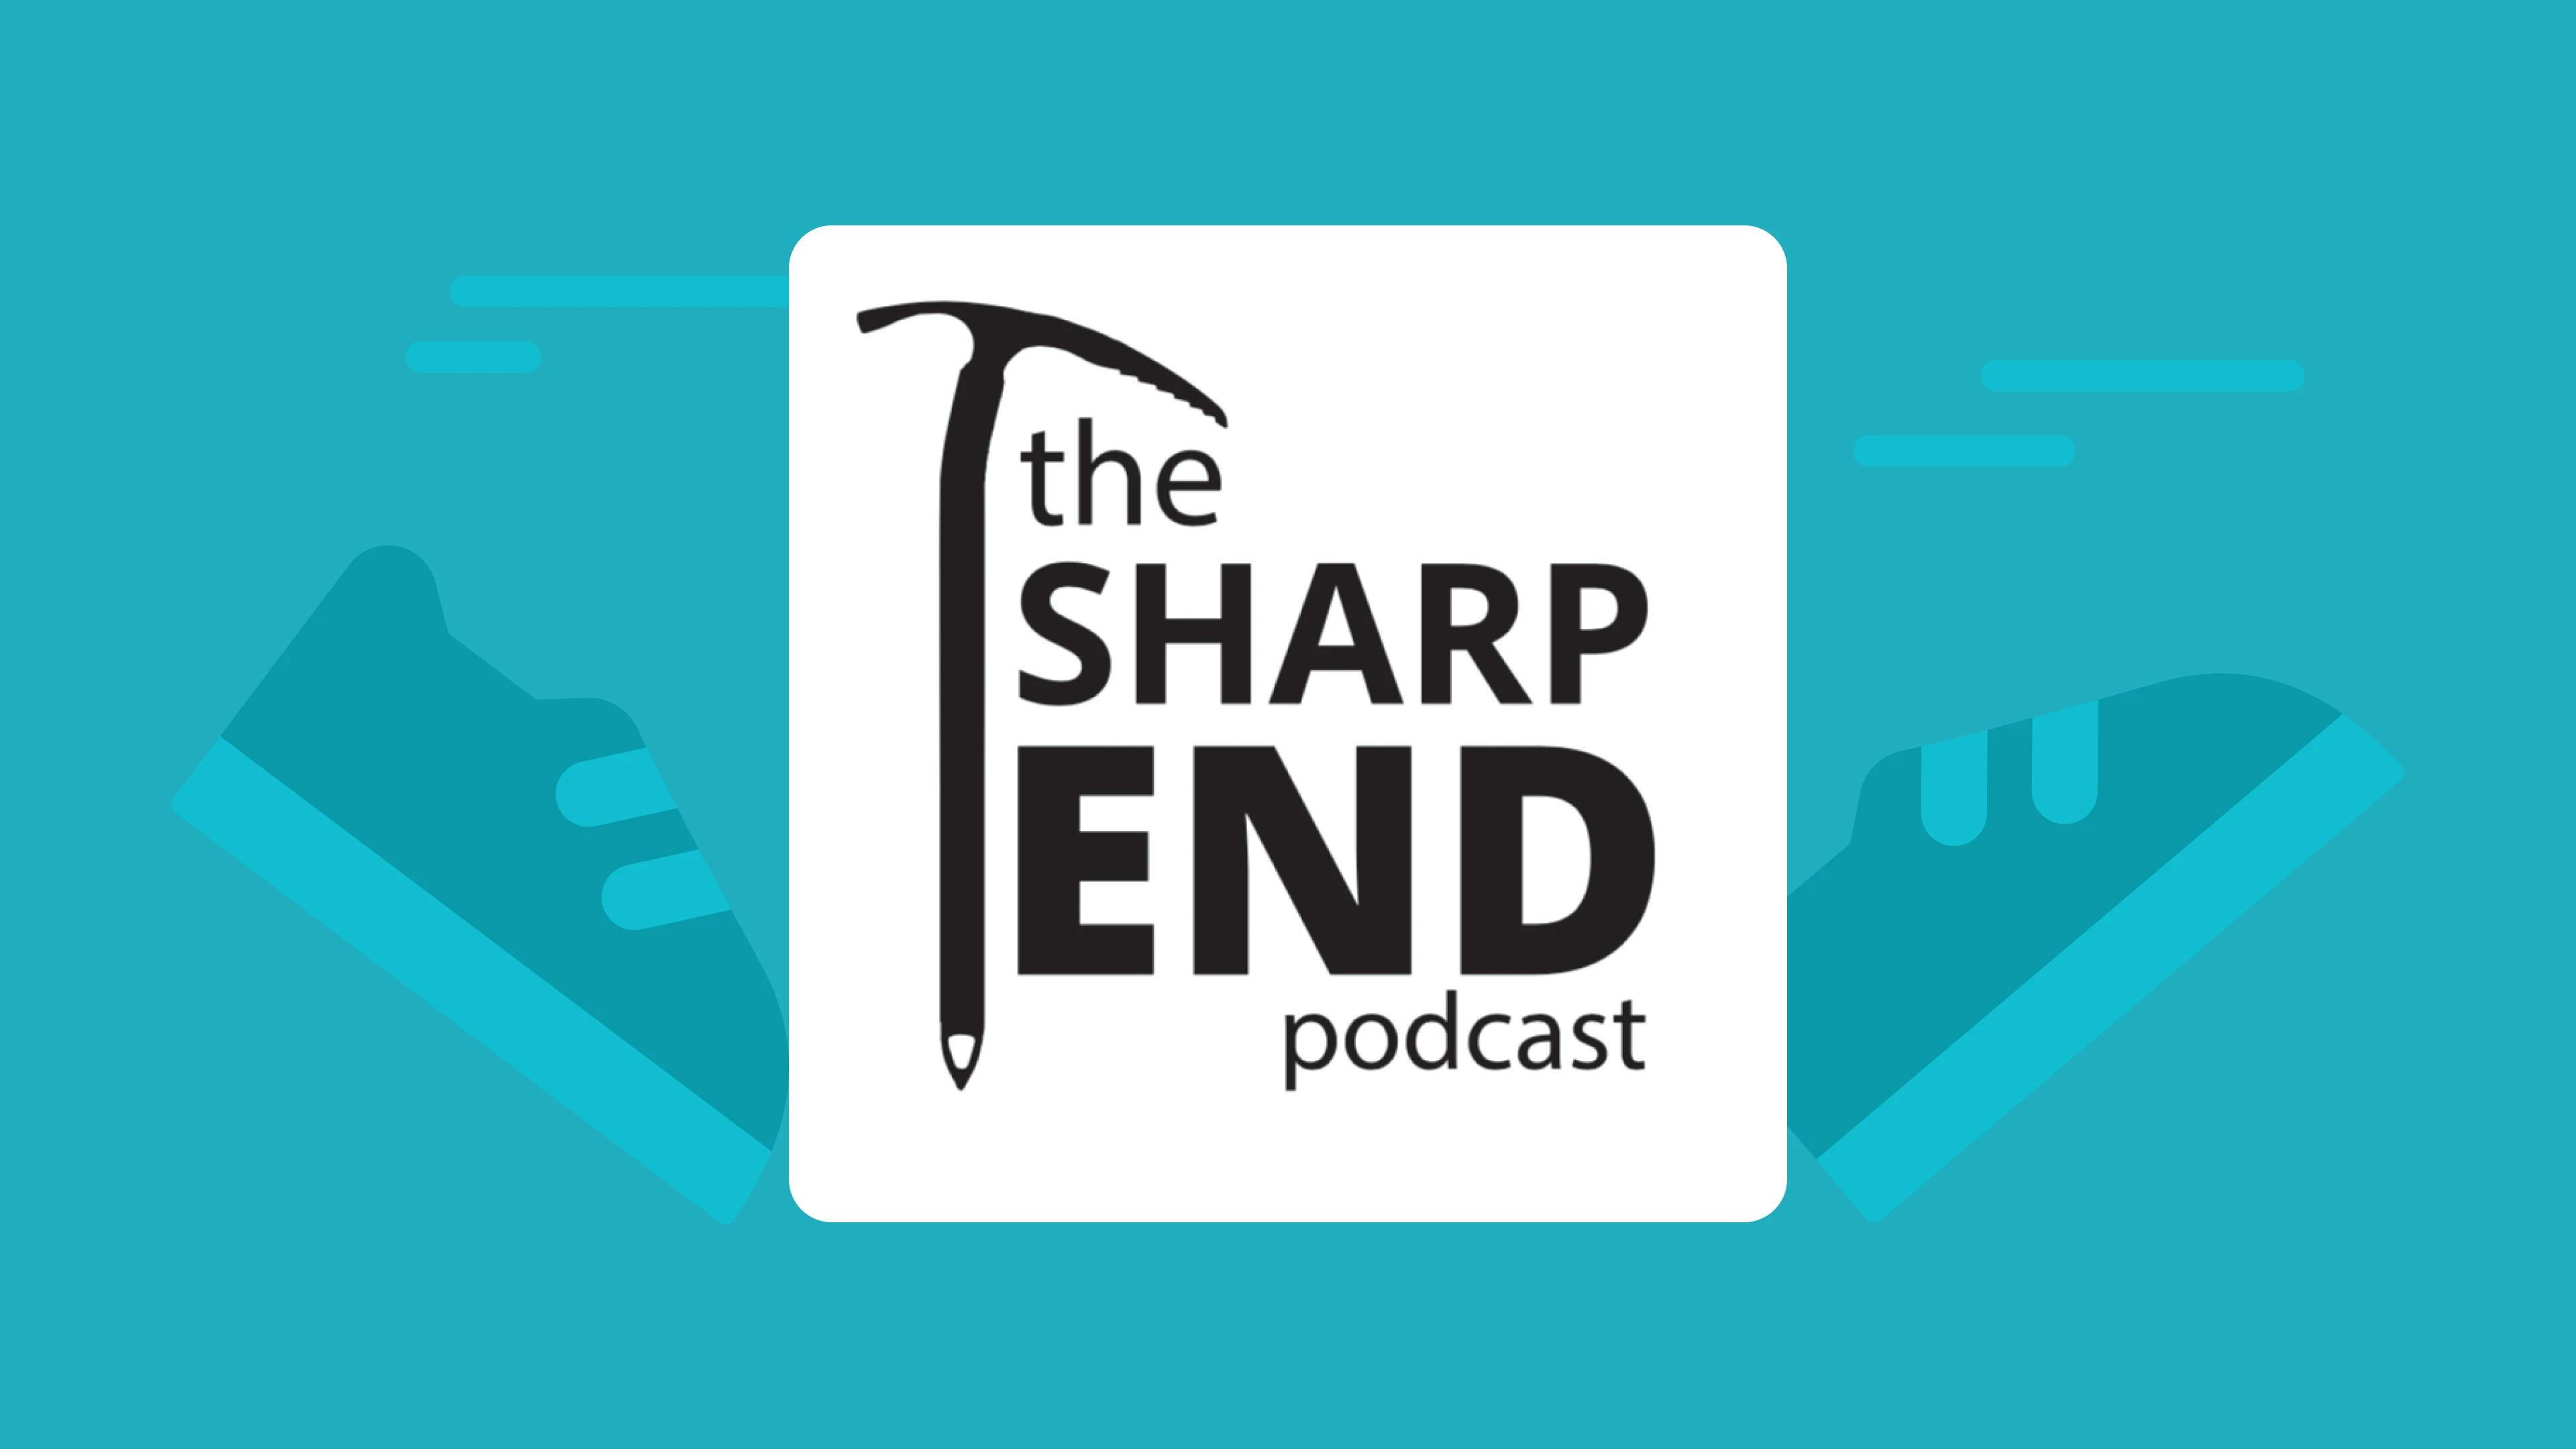 the_sharp_end podcast